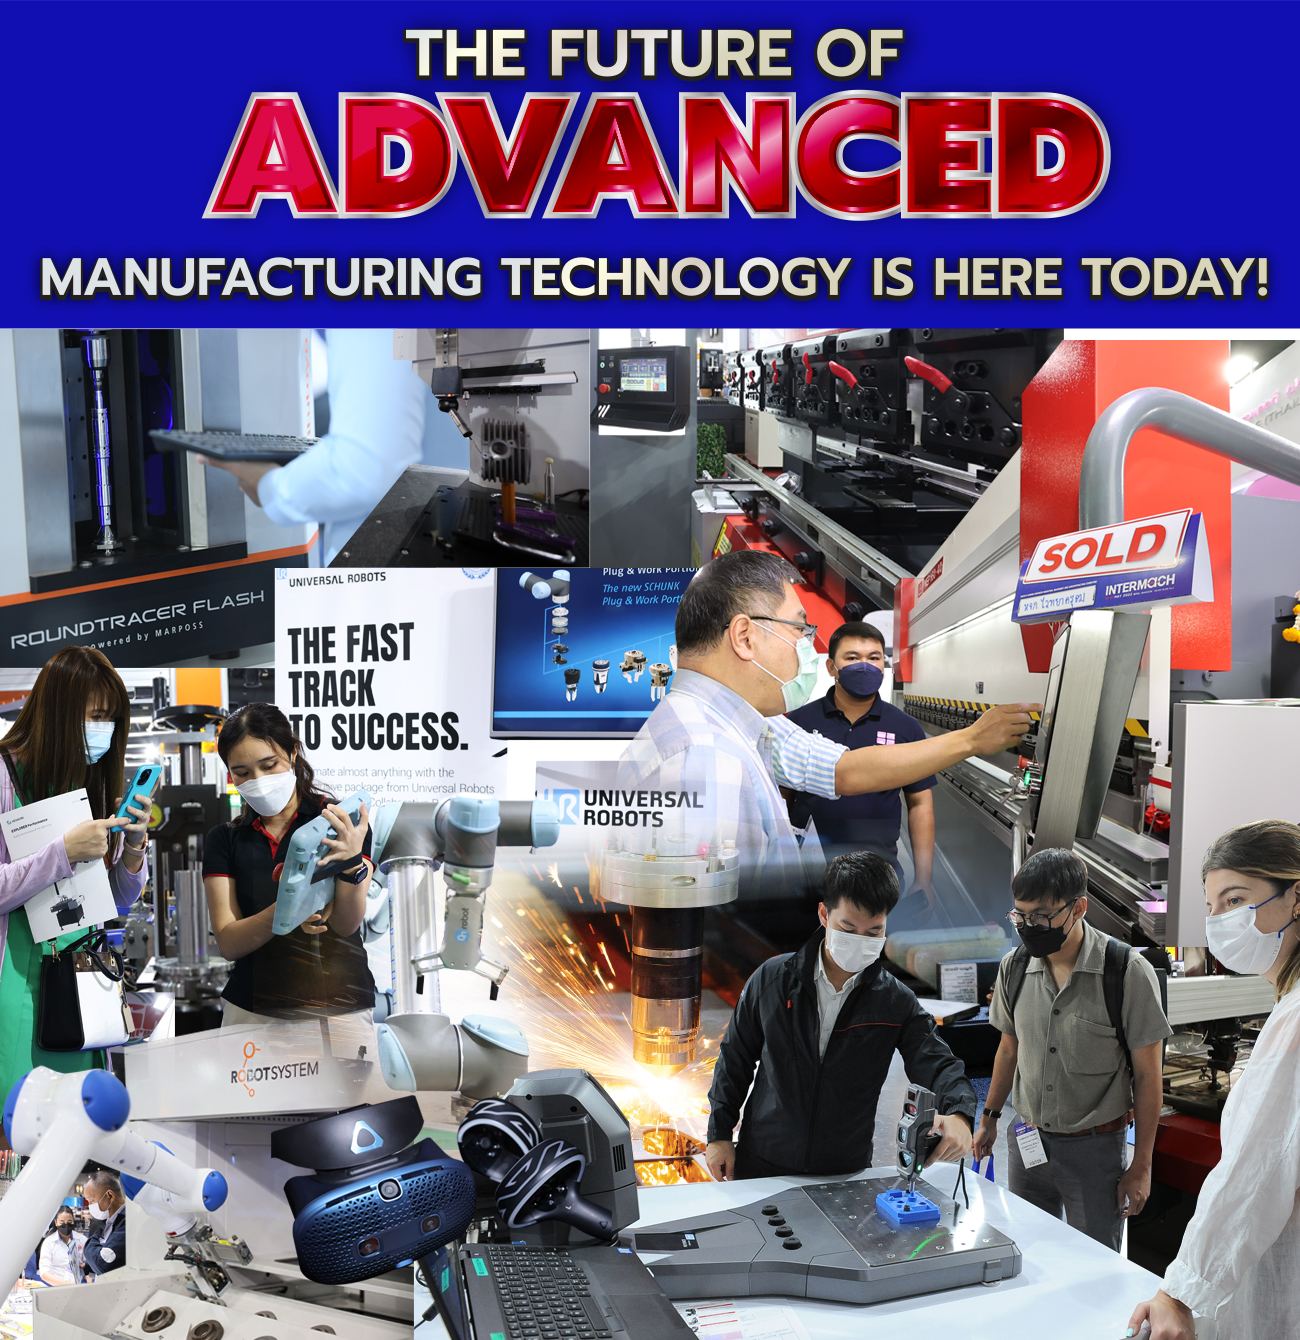 The Future Advanced Manufacturing Technology is here today!